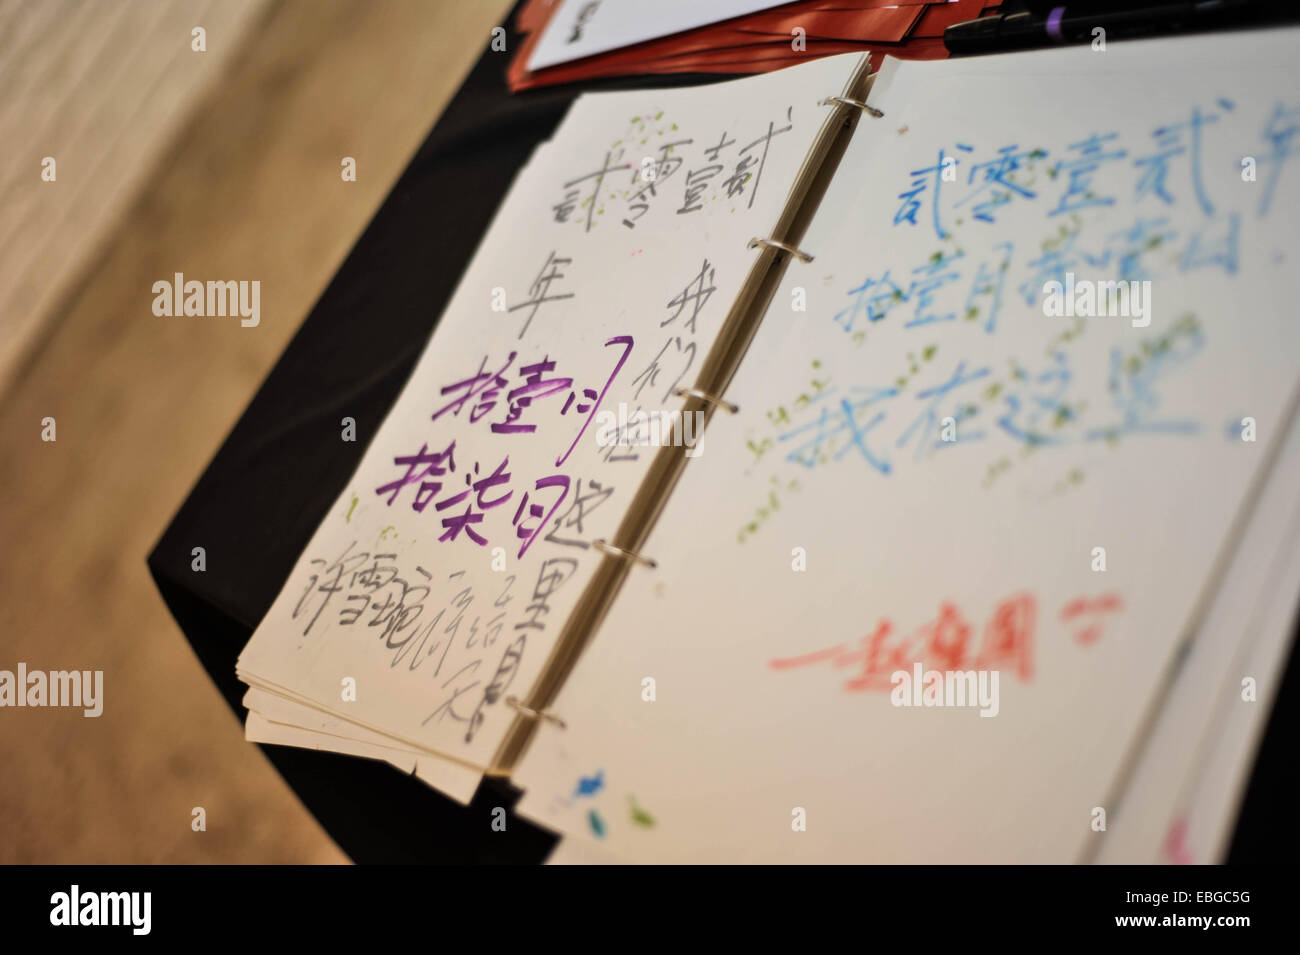 Guest book in a Chinese art gallery, 798, Beijing, China Stock Photo